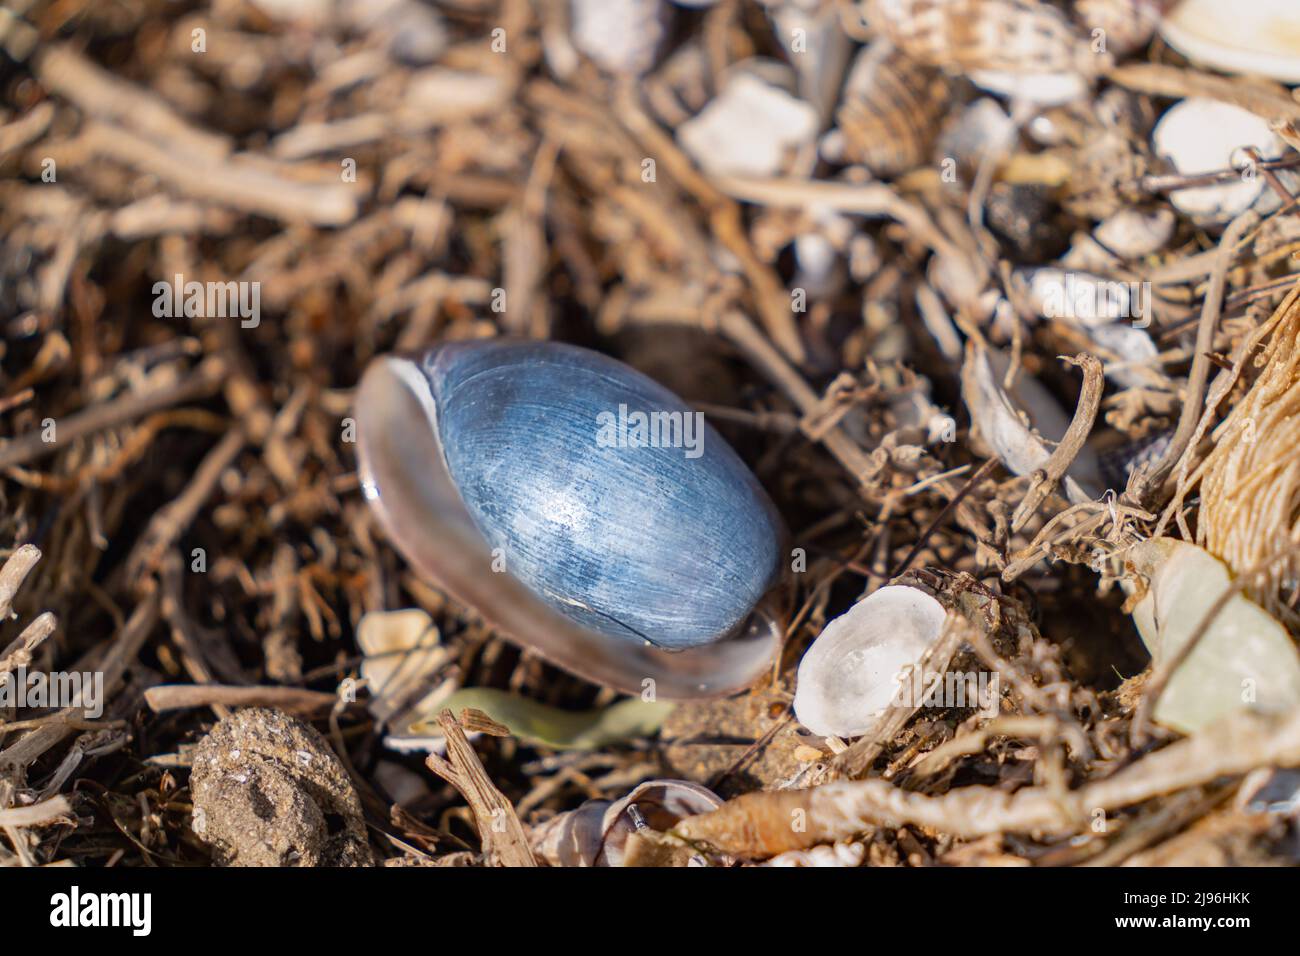 Close up of a blue seashell in the wrack line of a beach in Port Phillip Bay, Victoria, Australia Stock Photo